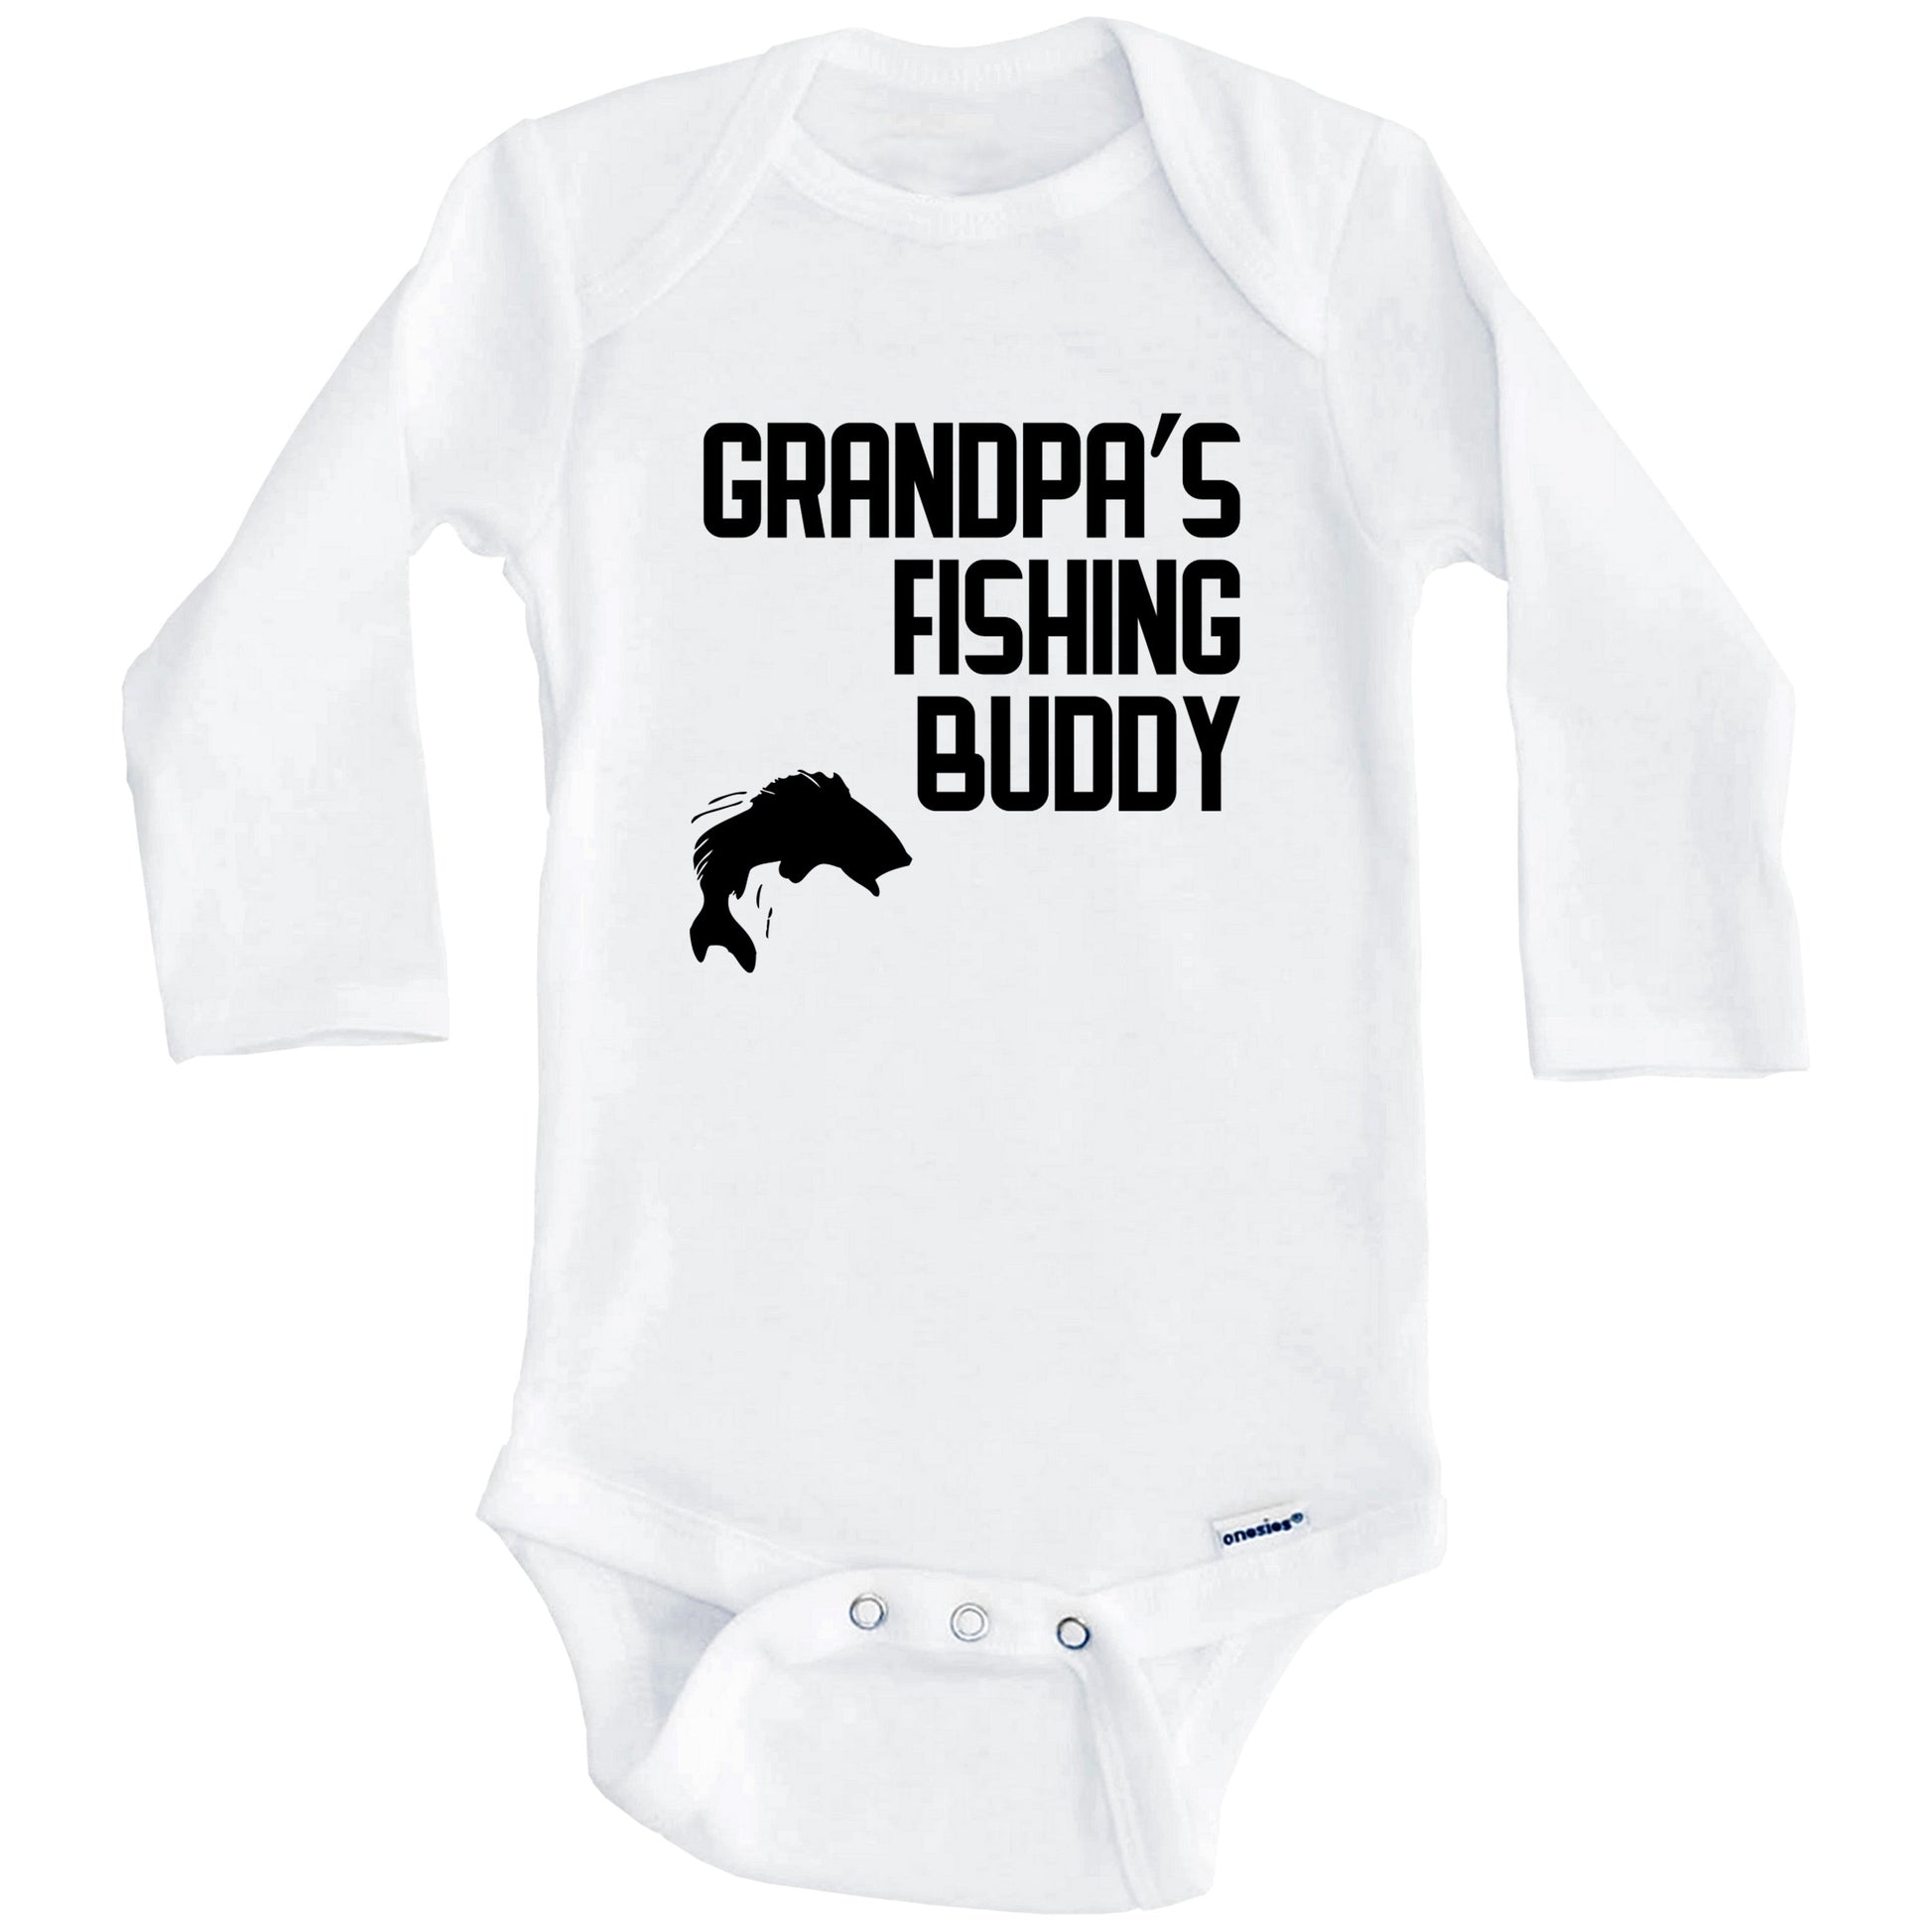 Grandpa's Fishing Buddy Baby Onesie (Long Sleeves) – Really Awesome Shirts